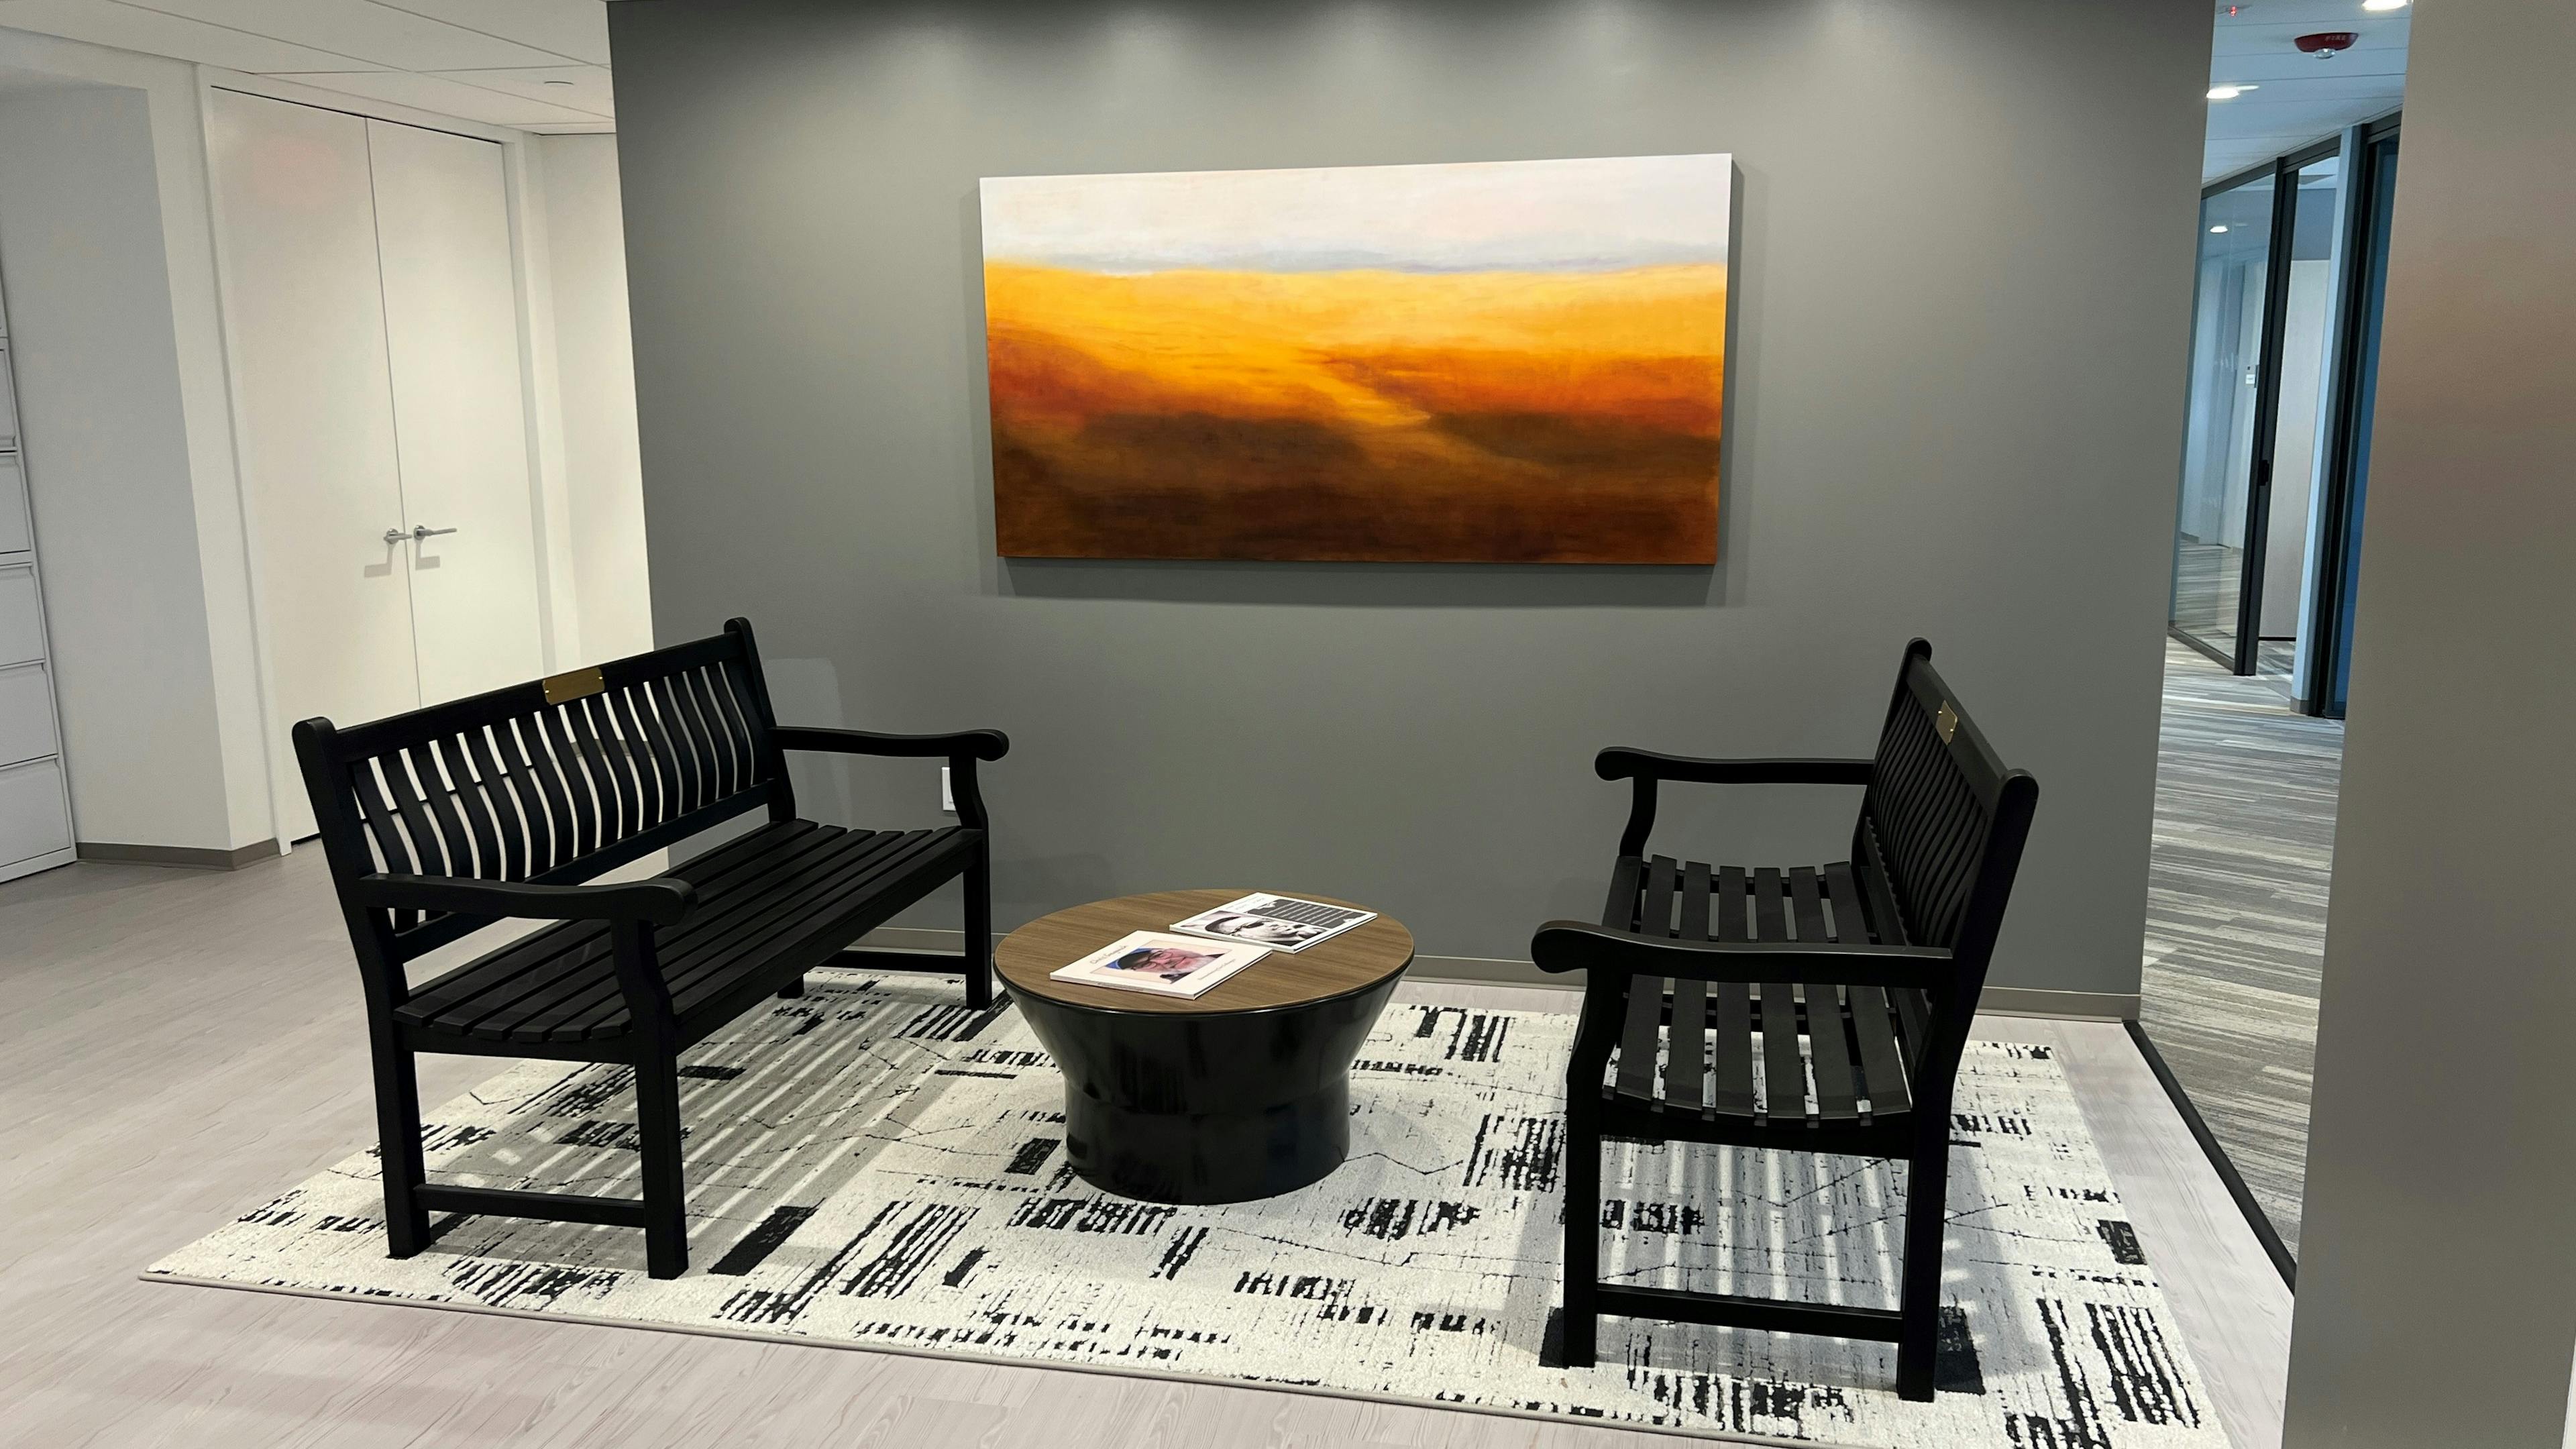 Two benches in an office waiting room area, a small round coffee table in between and a landscape painting on the wall facing the viewer